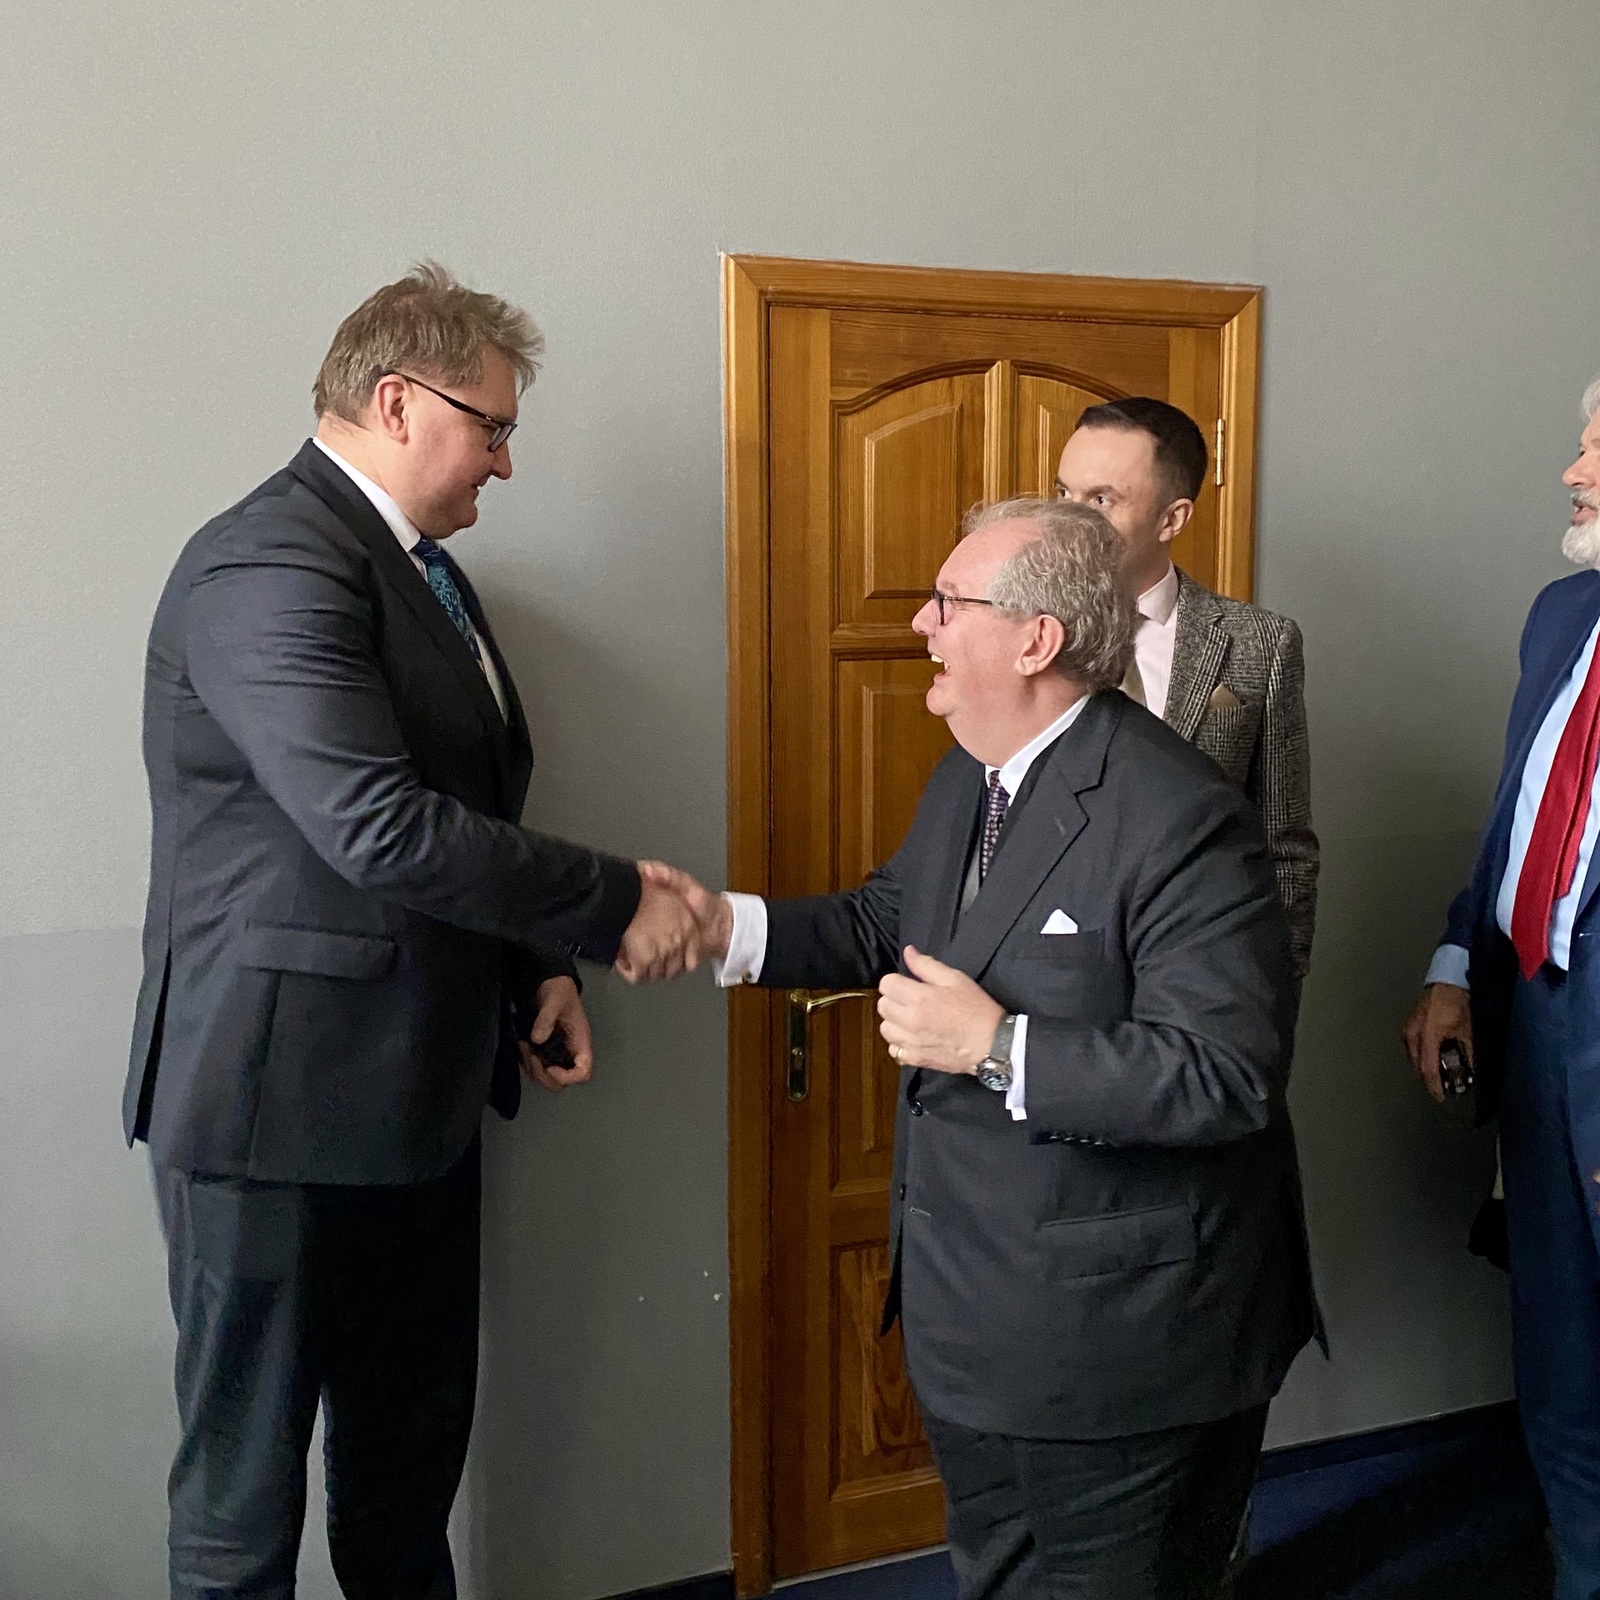 24 Jan 23 - Our delegation was warmly welcomed by the Ukrainian Trade Minister Taras Kachka.